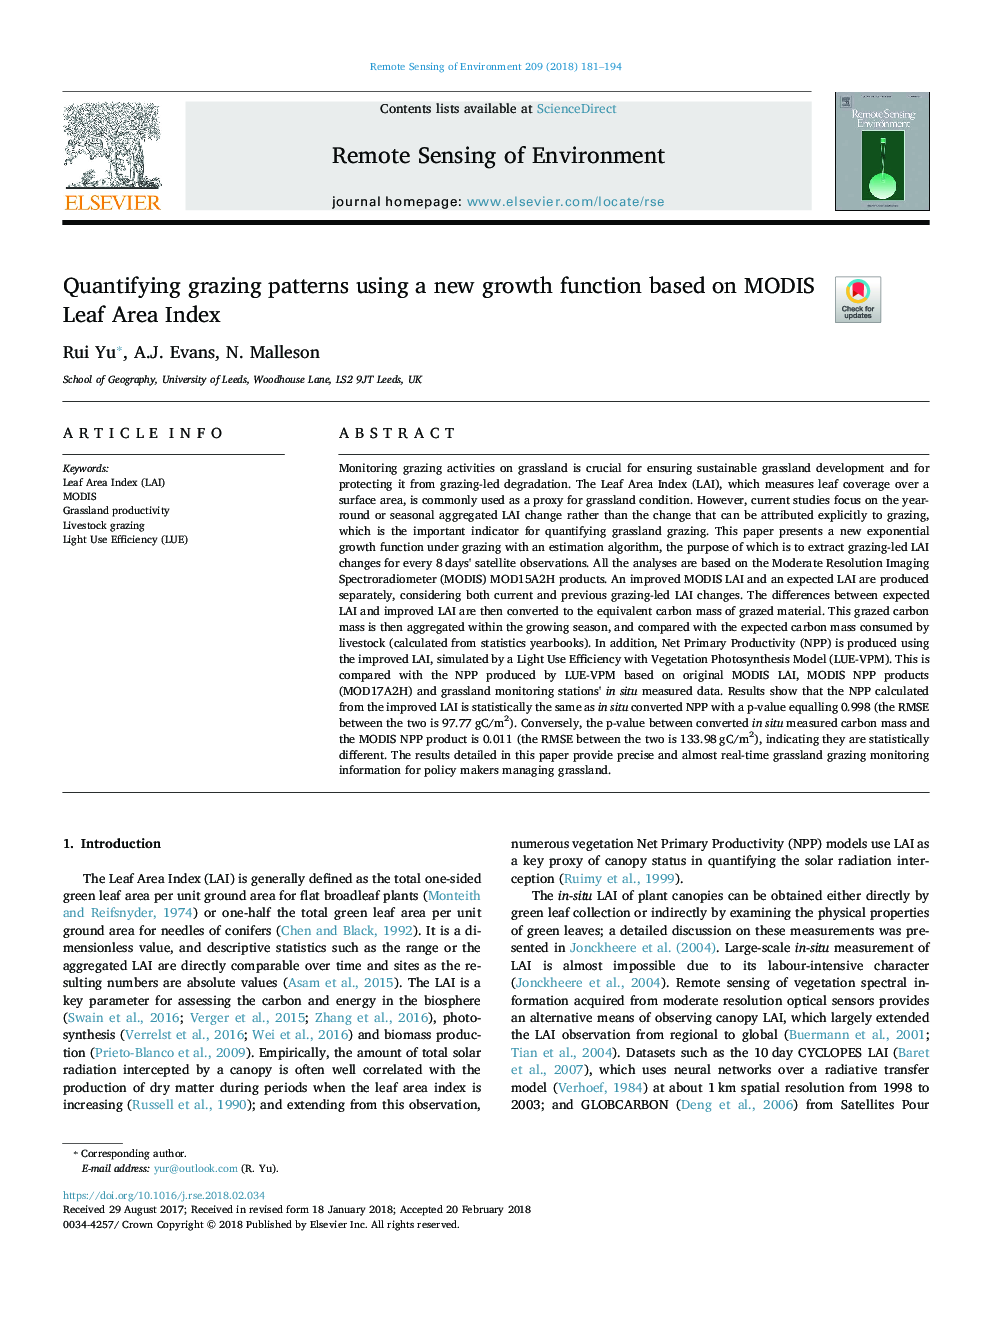 Quantifying grazing patterns using a new growth function based on MODIS Leaf Area Index